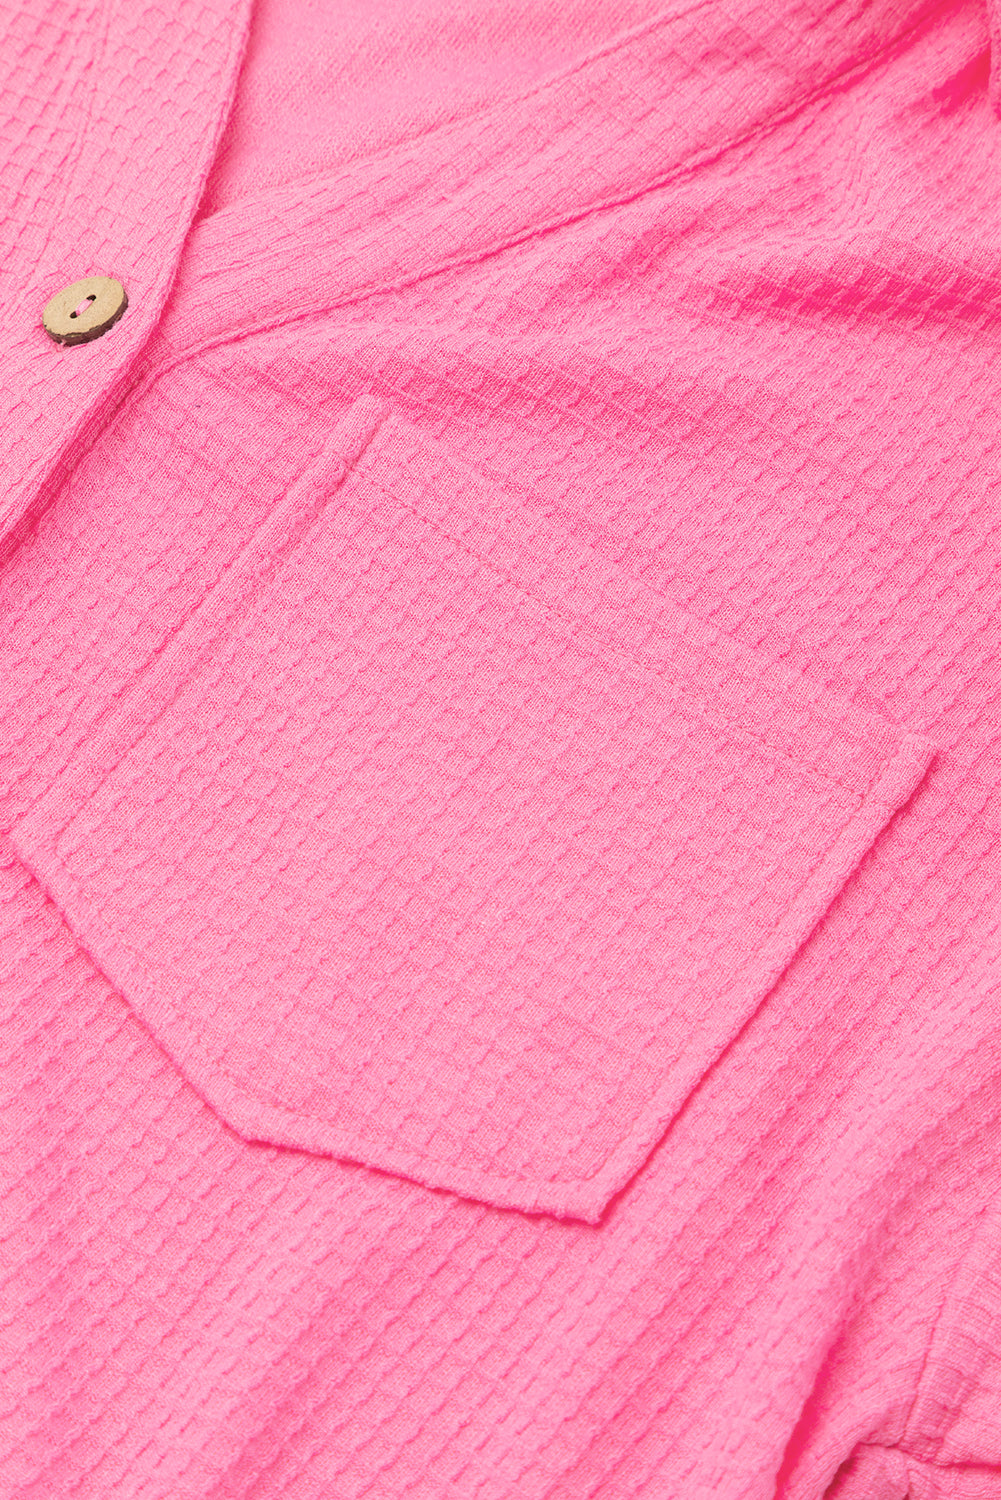 Bright Pink Textured Shorts Outfit